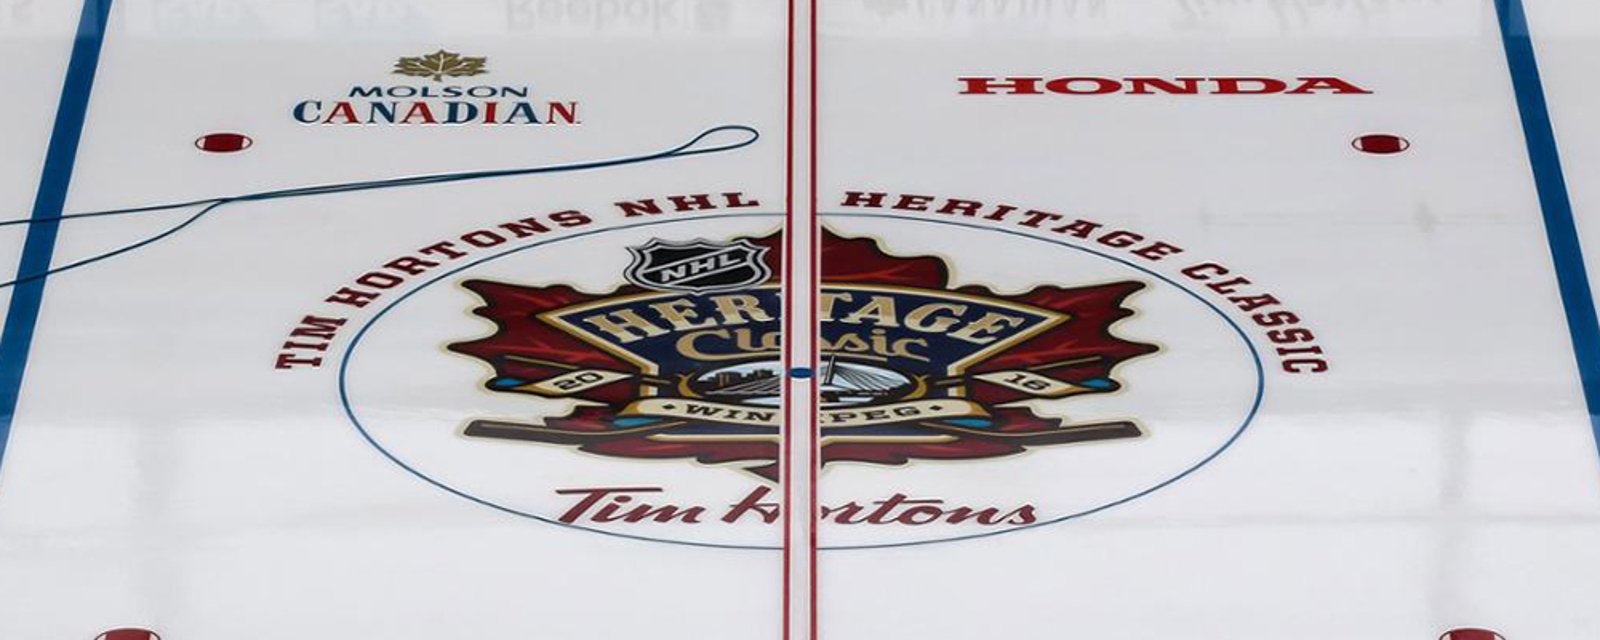 Maple Leafs and Sabres reportedly to headline 2022 NHL Heritage Classic